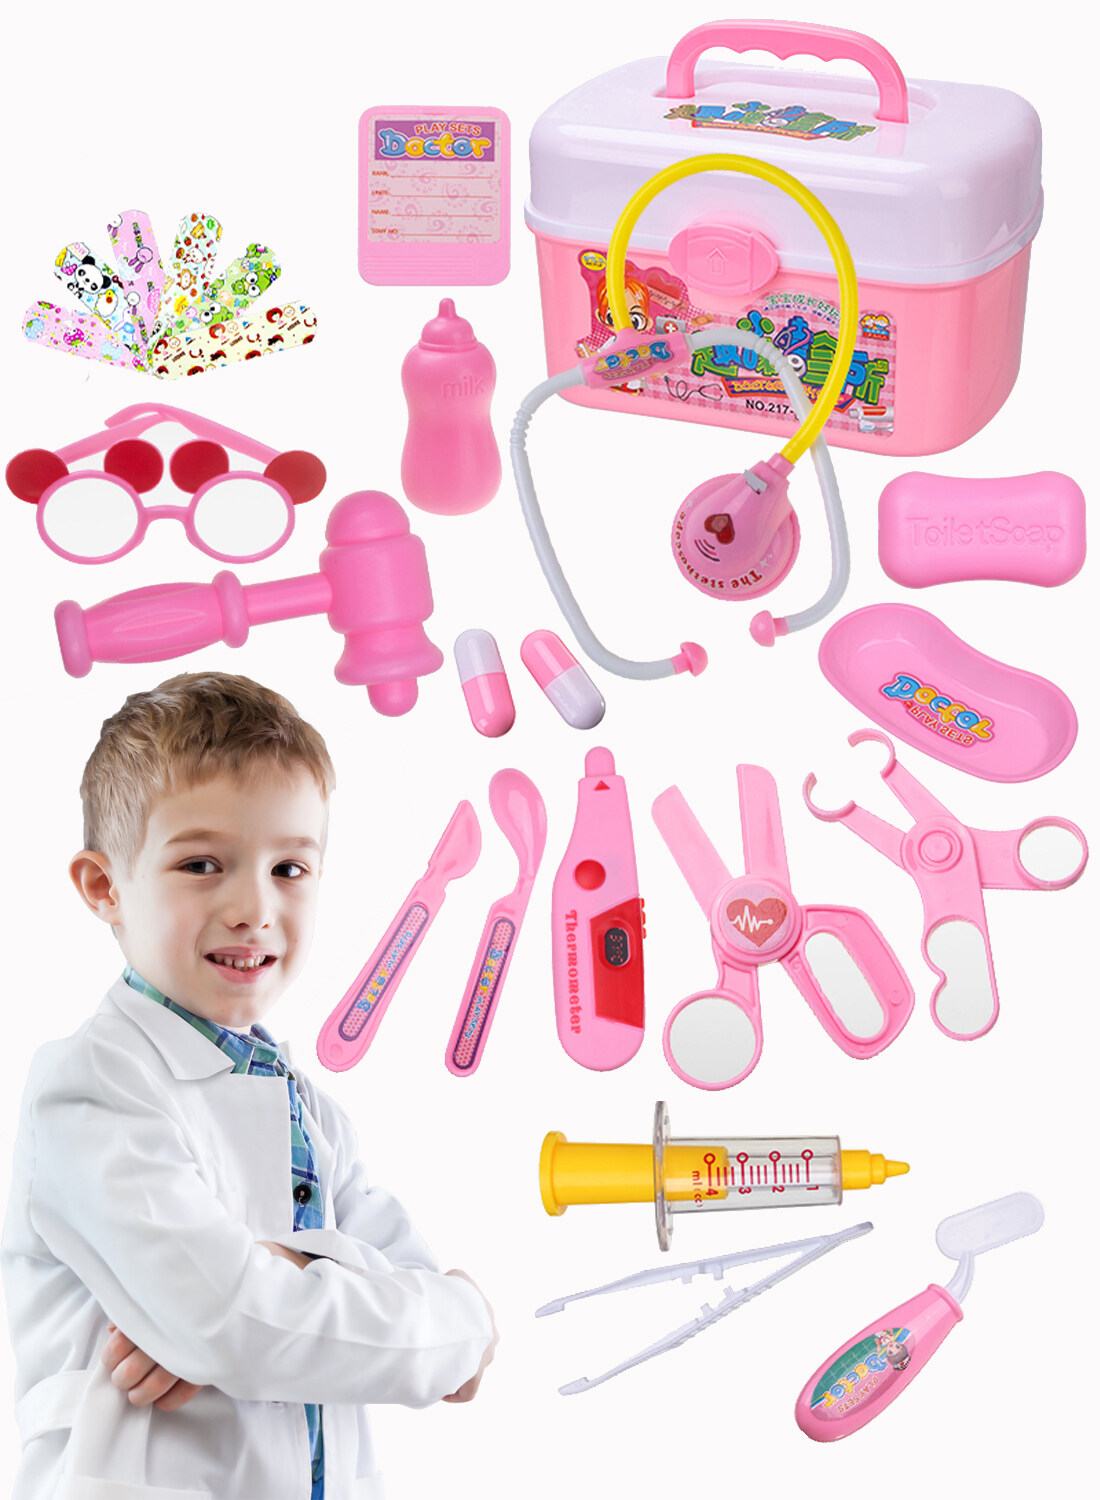 Toy Doctor Kits 20 Pcs Pretend Play Doctor Kit Toys Stethoscope Medical Kit Imagination Play for Kids